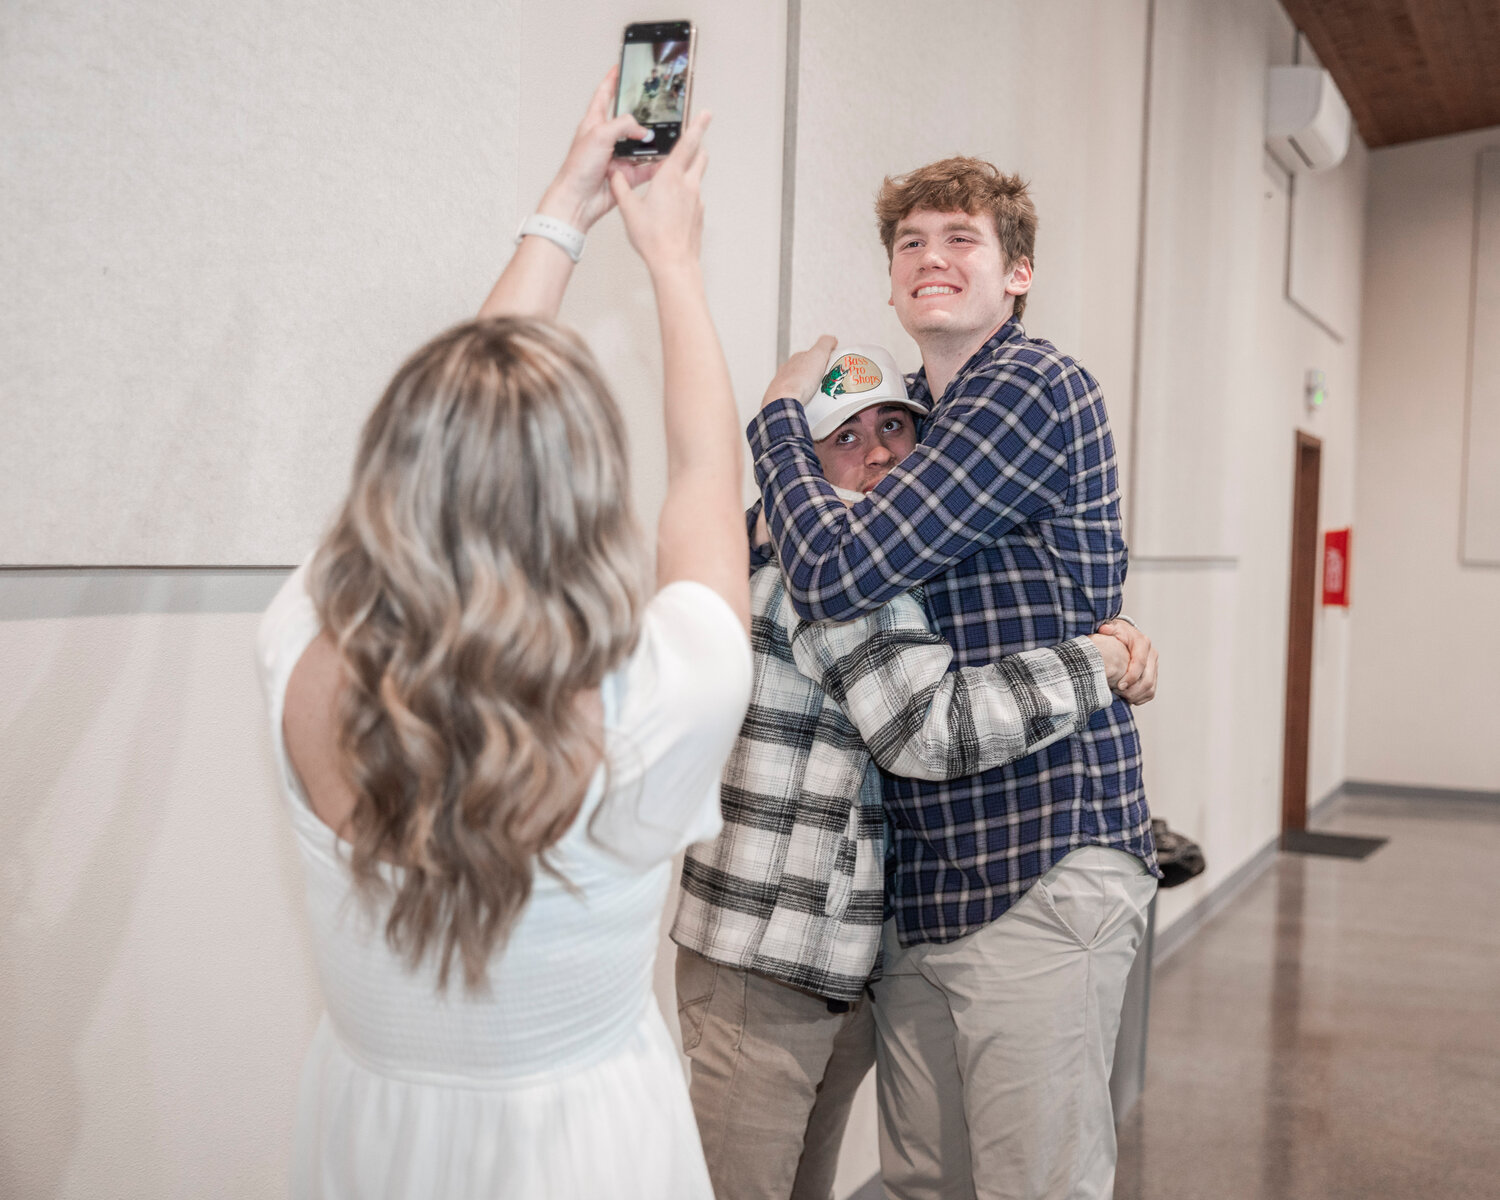 Cameron Sheets stretches up as Soren Dalan smiles for a photo while hugging Gabe Cuestas Tuesday evening during the “Athletes of the Year” banquet at the Jester Auto Museum.